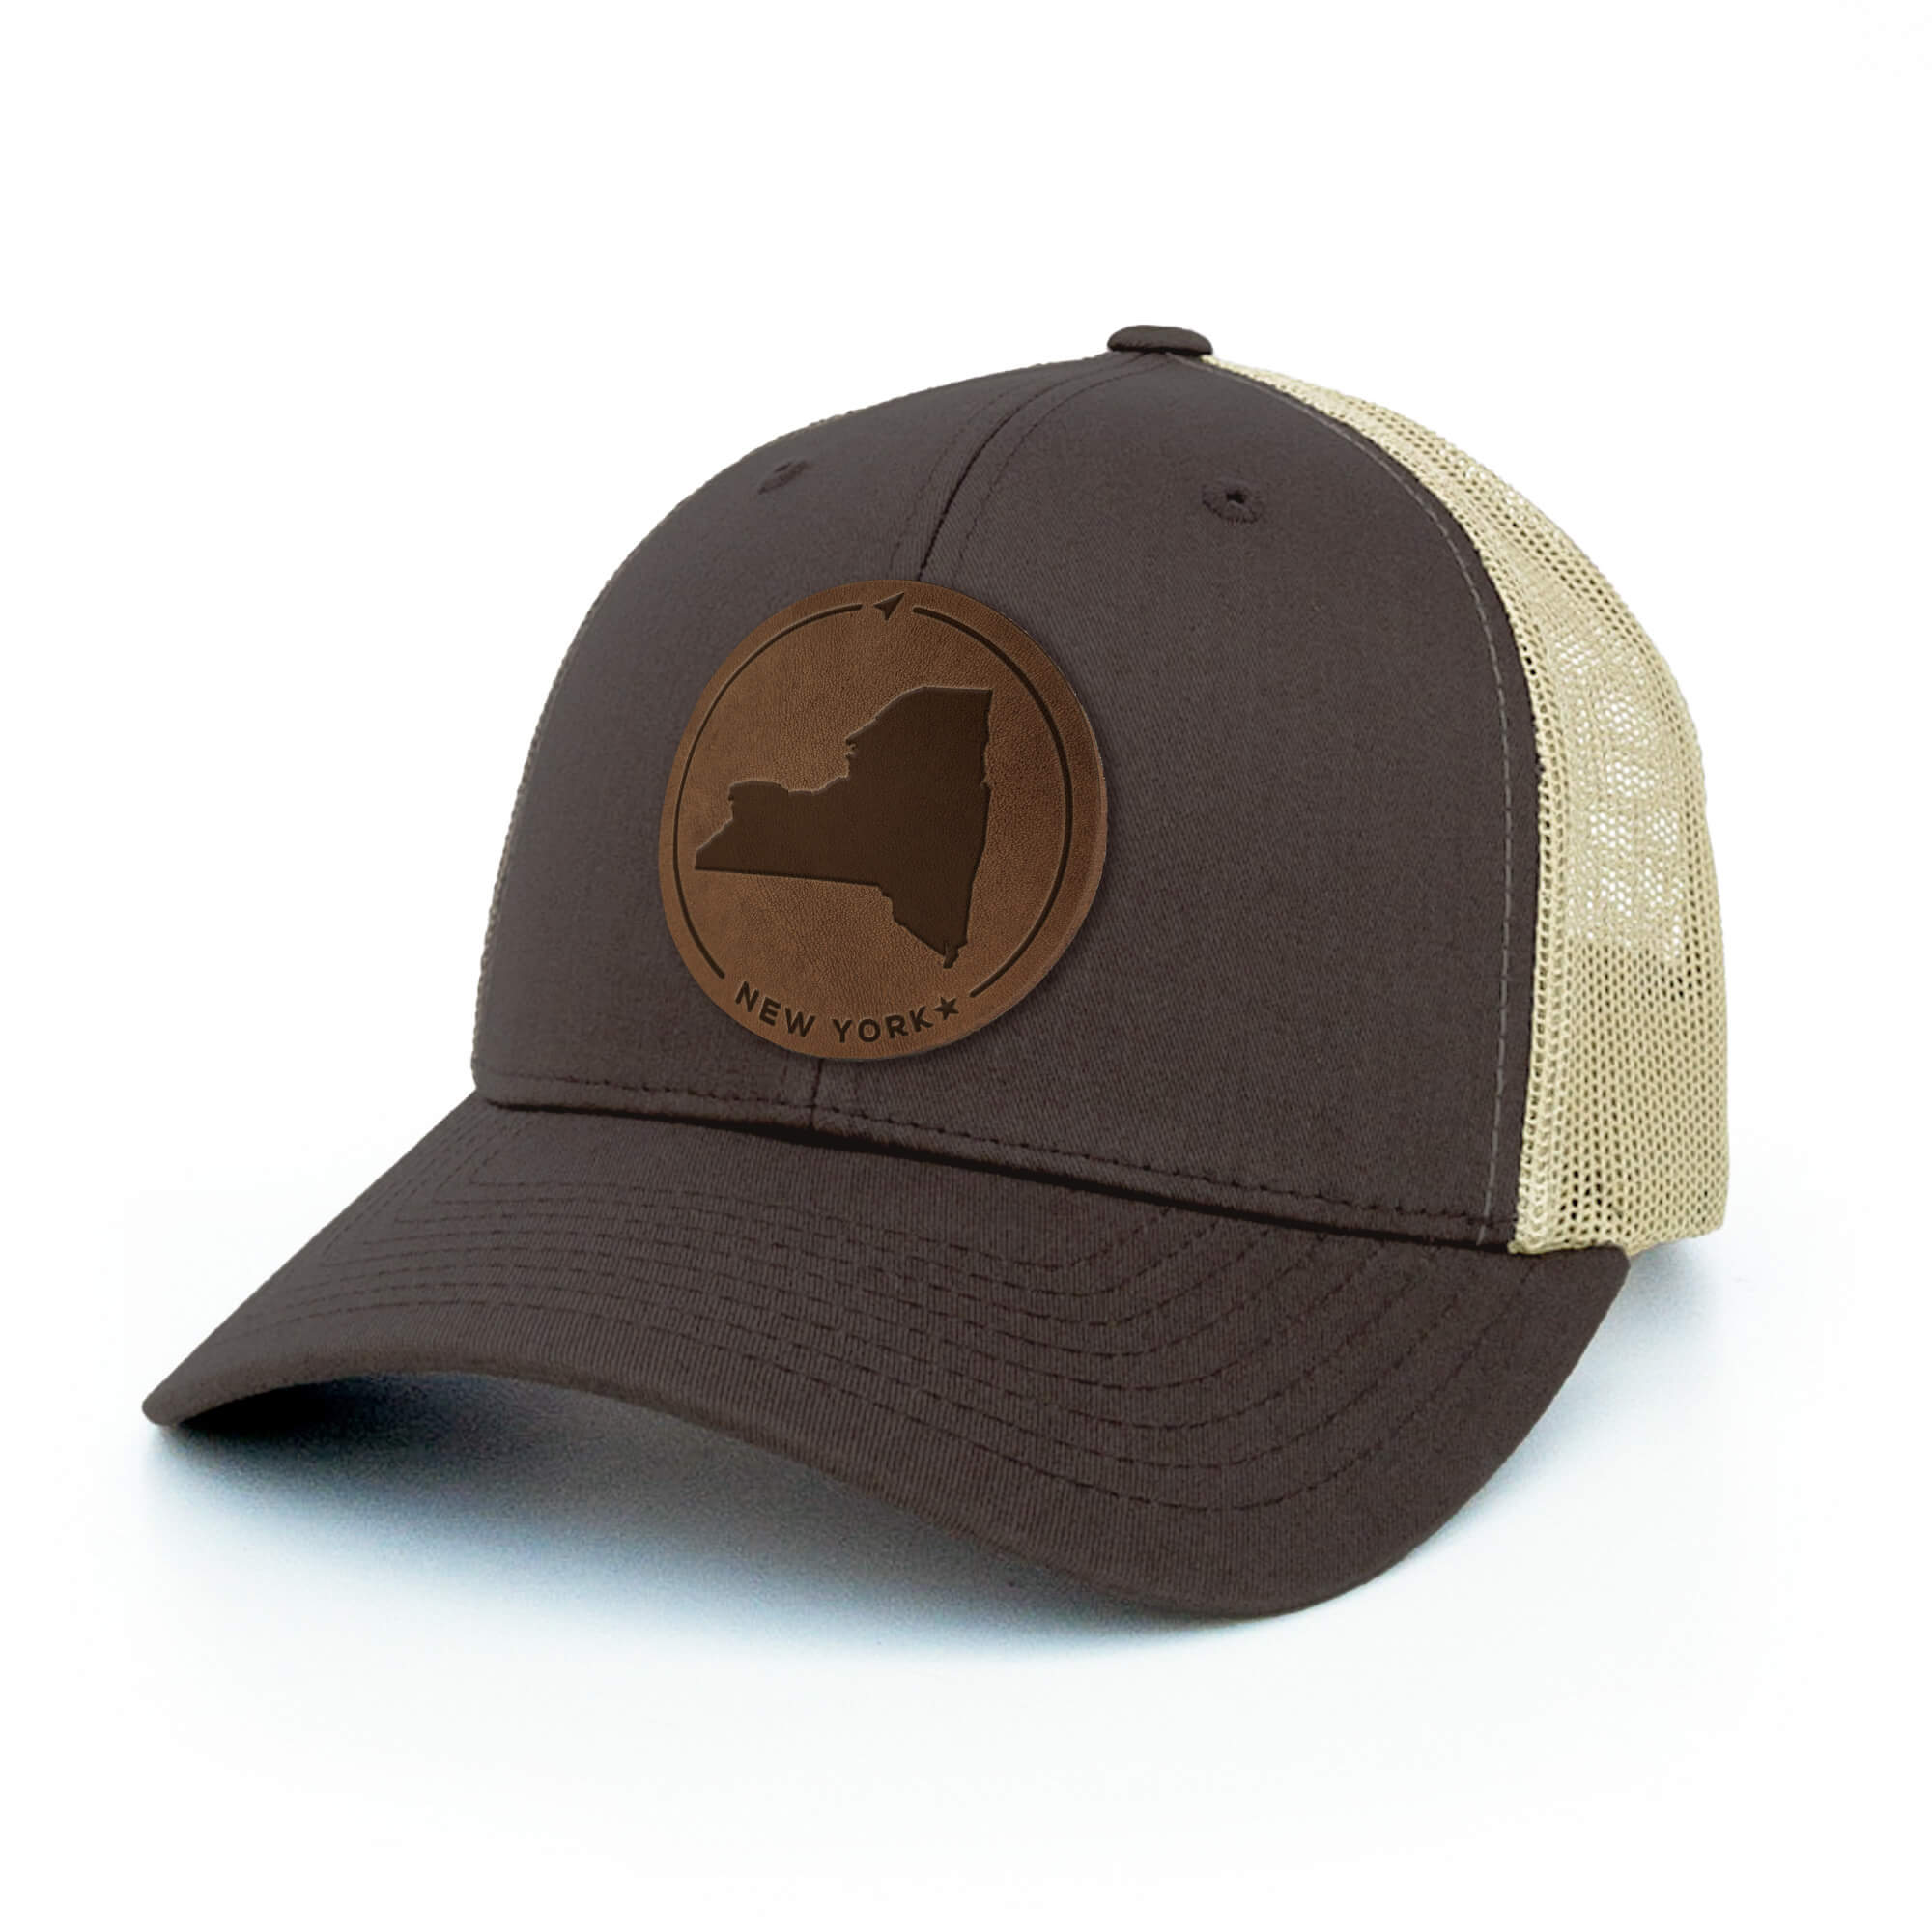 Brown and khaki trucker hat with full-grain leather patch of New York | BLACK-003-006, CHARC-003-006, NAVY-003-006, HGREY-003-006, MOSS-003-006, BROWN-003-006